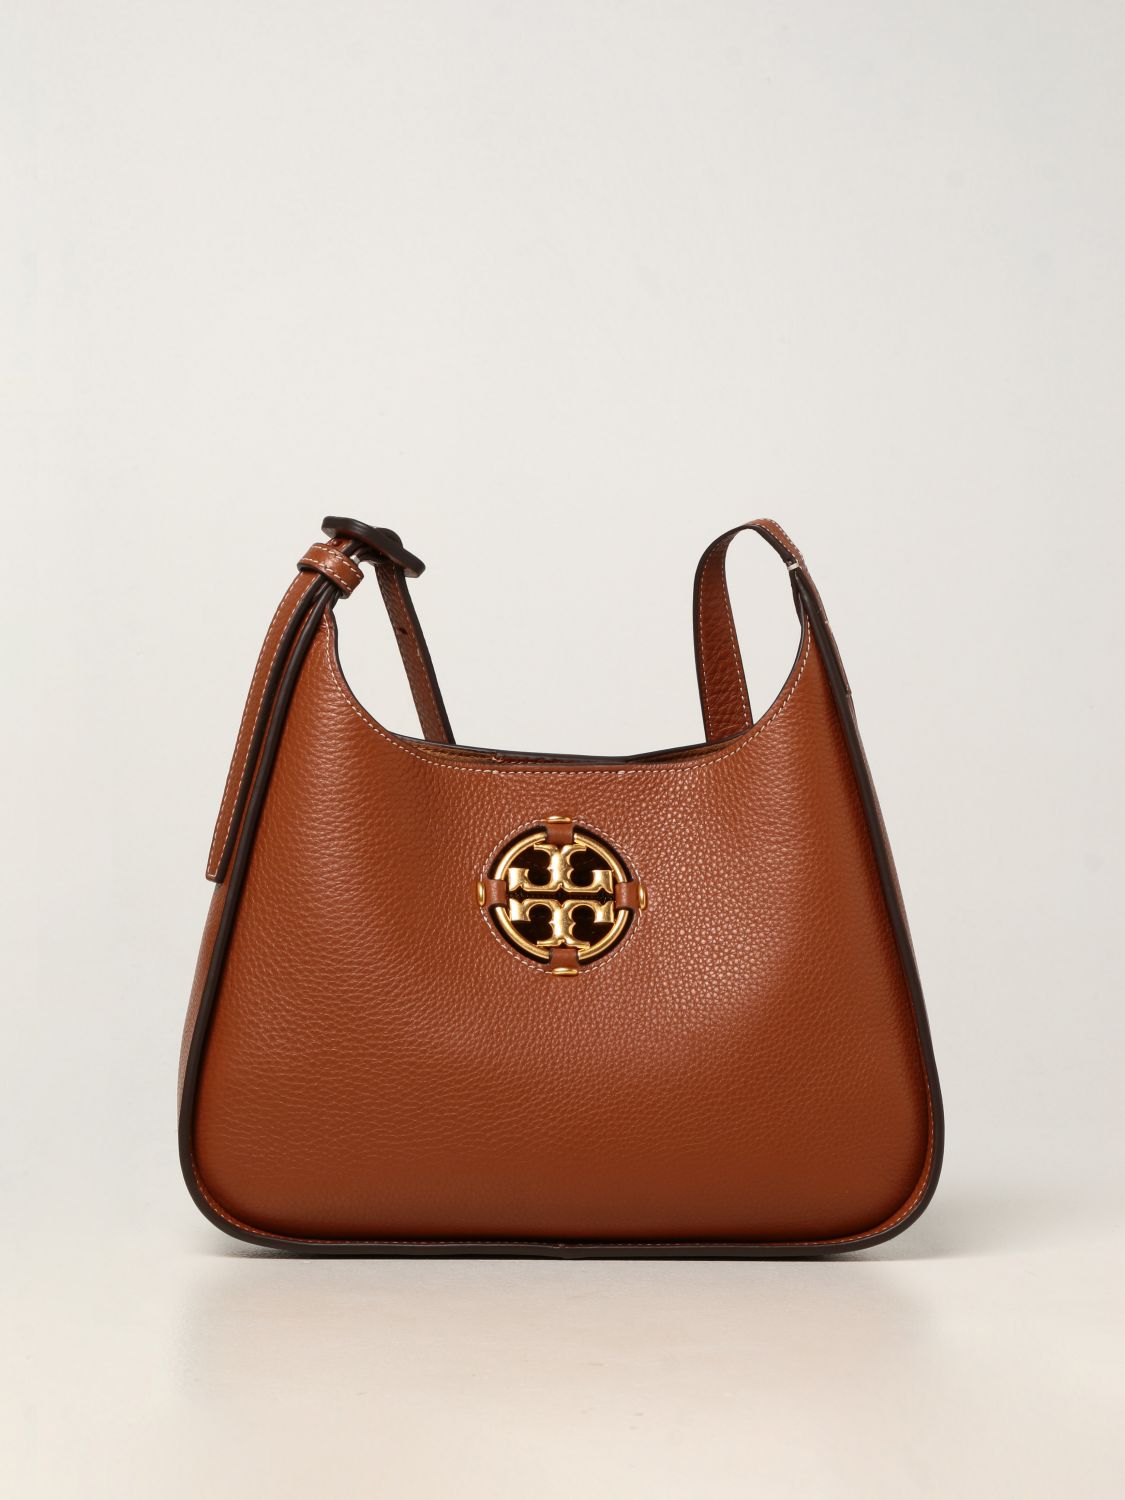 TORY BURCH: Miller bag in grained leather with logo - Brown | Tory Burch  crossbody bags 82982 online on 